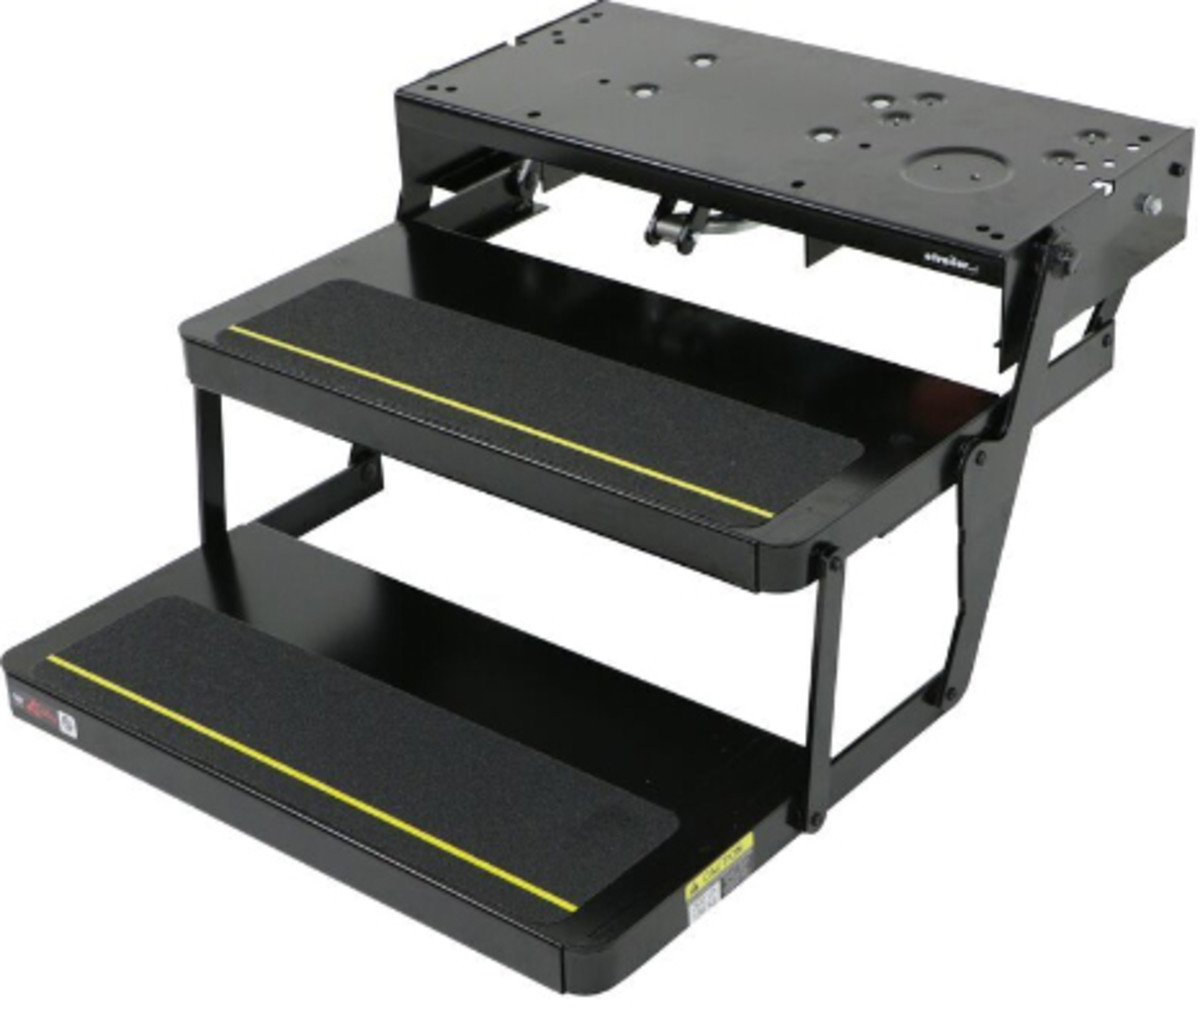 Popular Kwikee brand of powered RV electric steps.